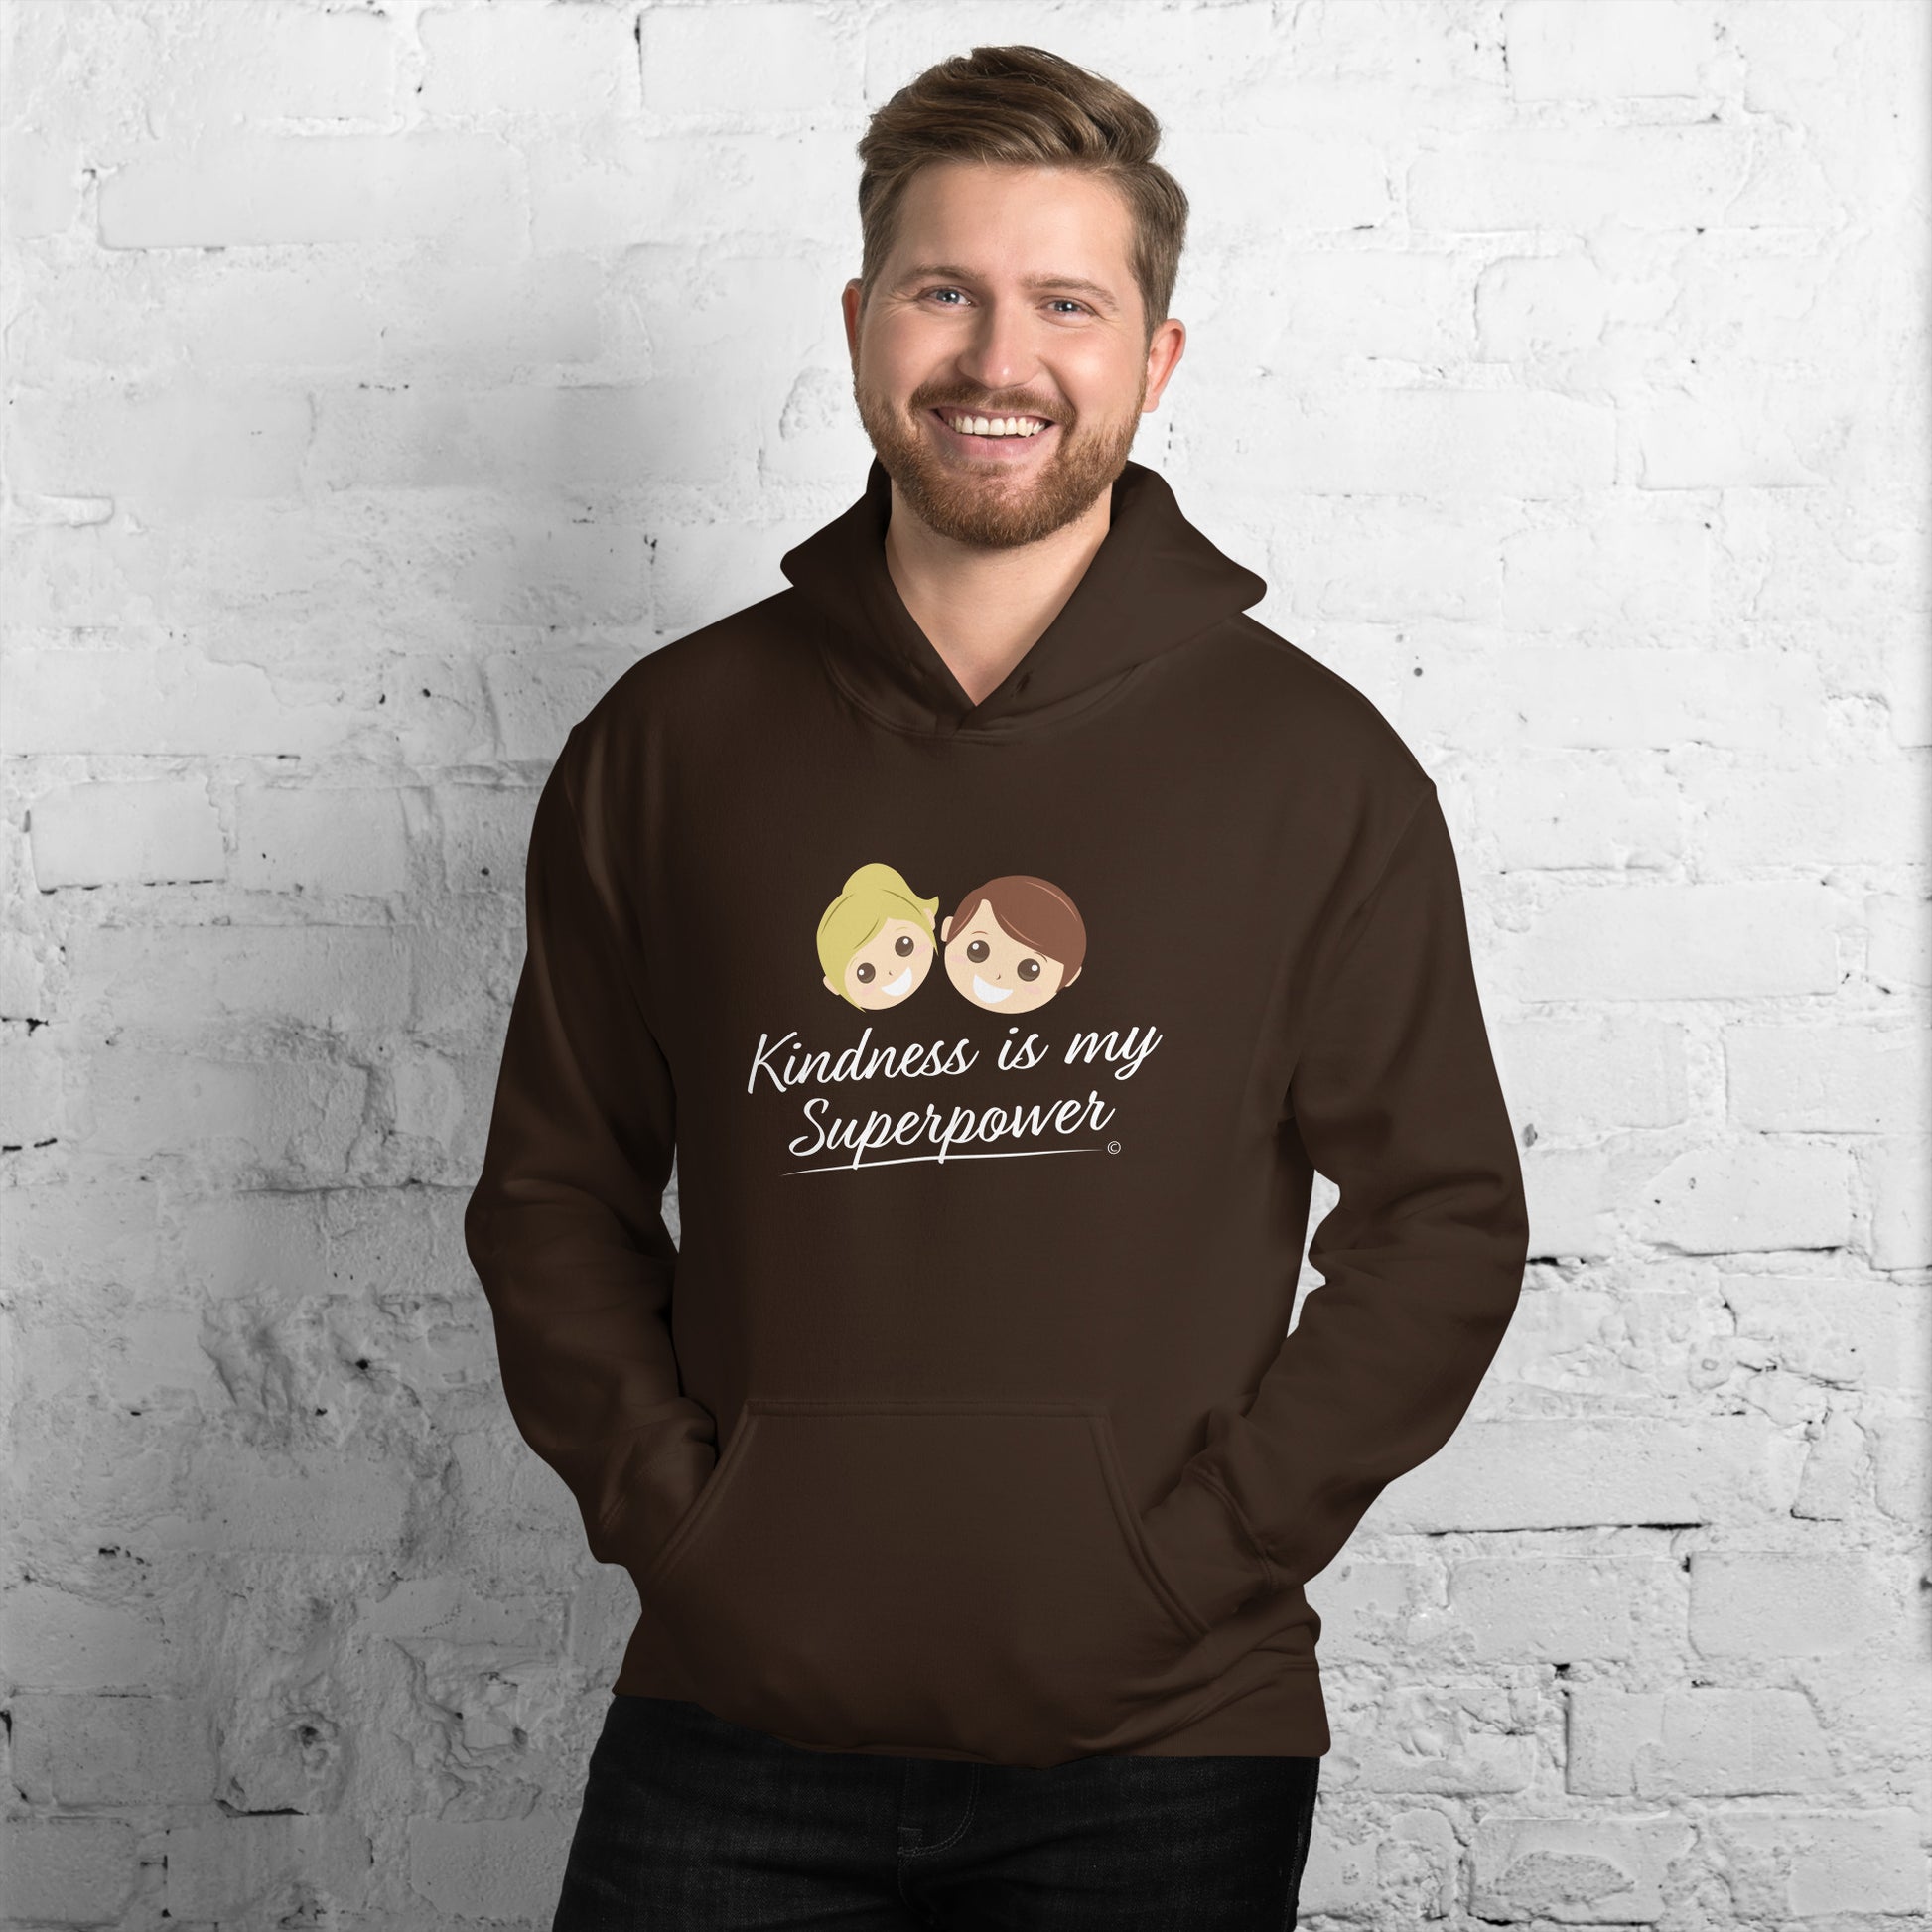 A smiling man showcasing a comfortable unisex hoodie in chocolate brown, featuring the uplifting quote 'Kindness is my Superpower' in bold lettering.